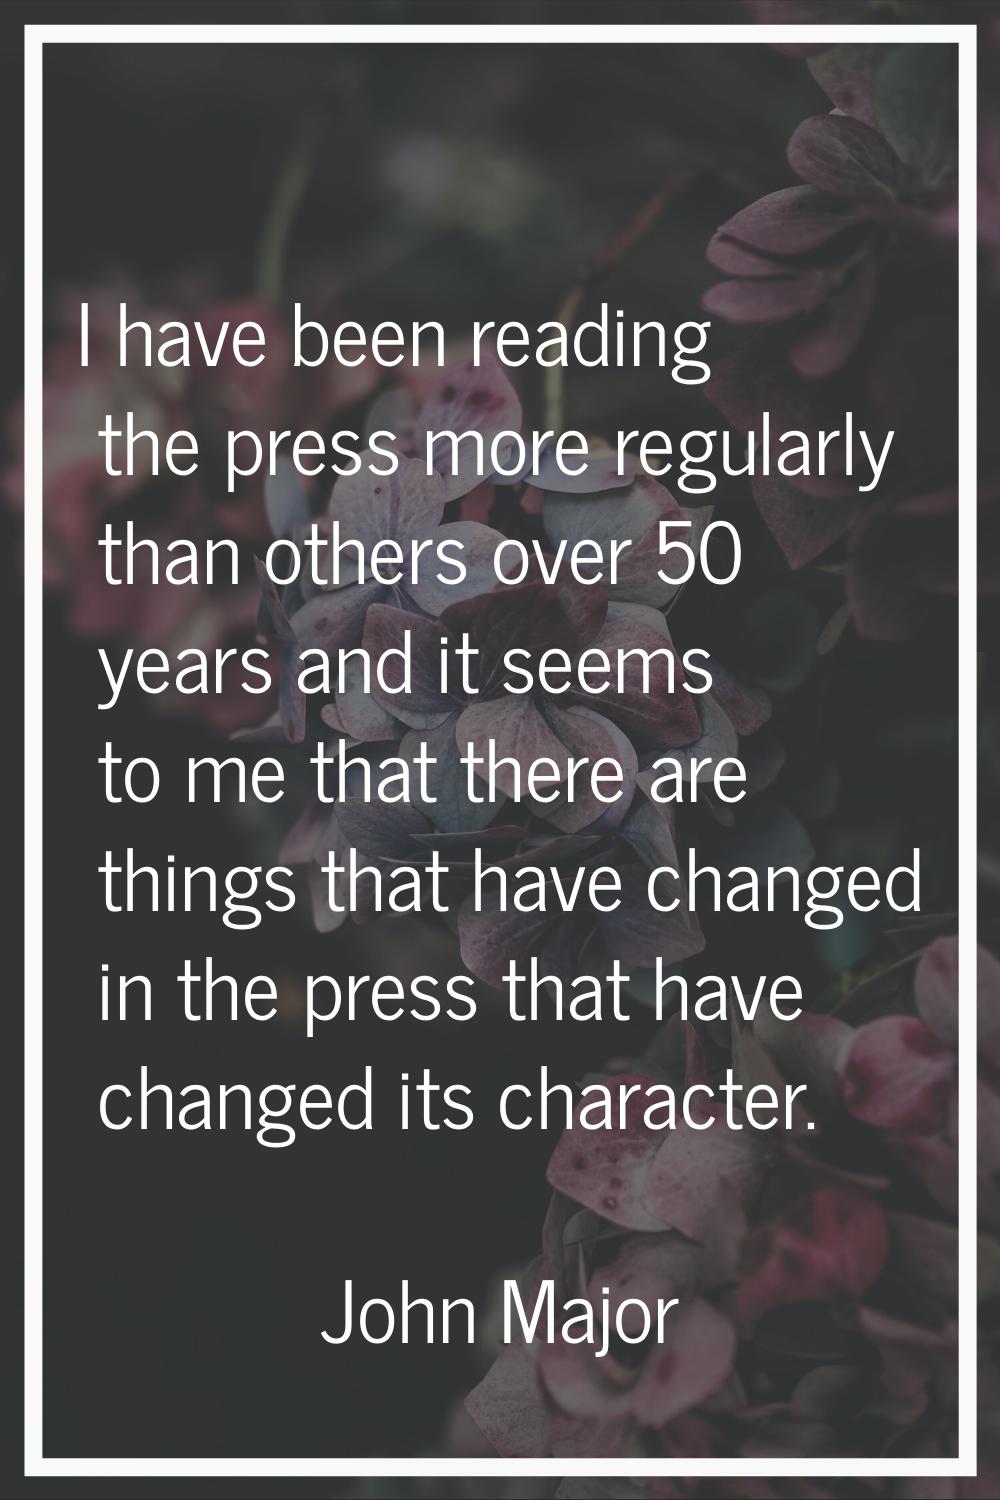 I have been reading the press more regularly than others over 50 years and it seems to me that ther